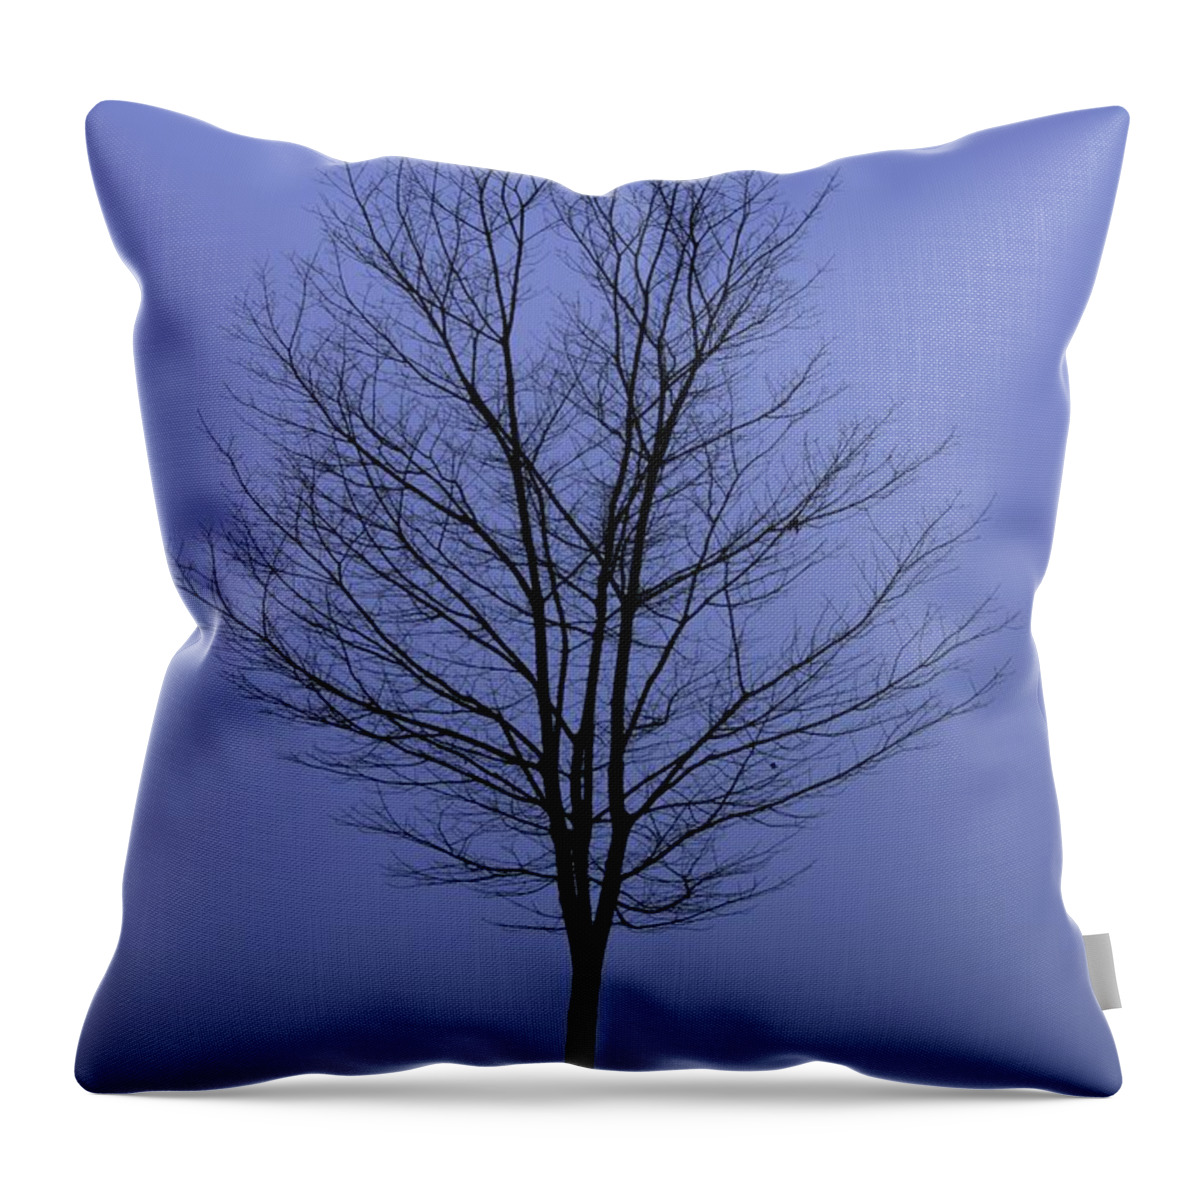 November Throw Pillow featuring the photograph Moody Blue November Day by Zennie